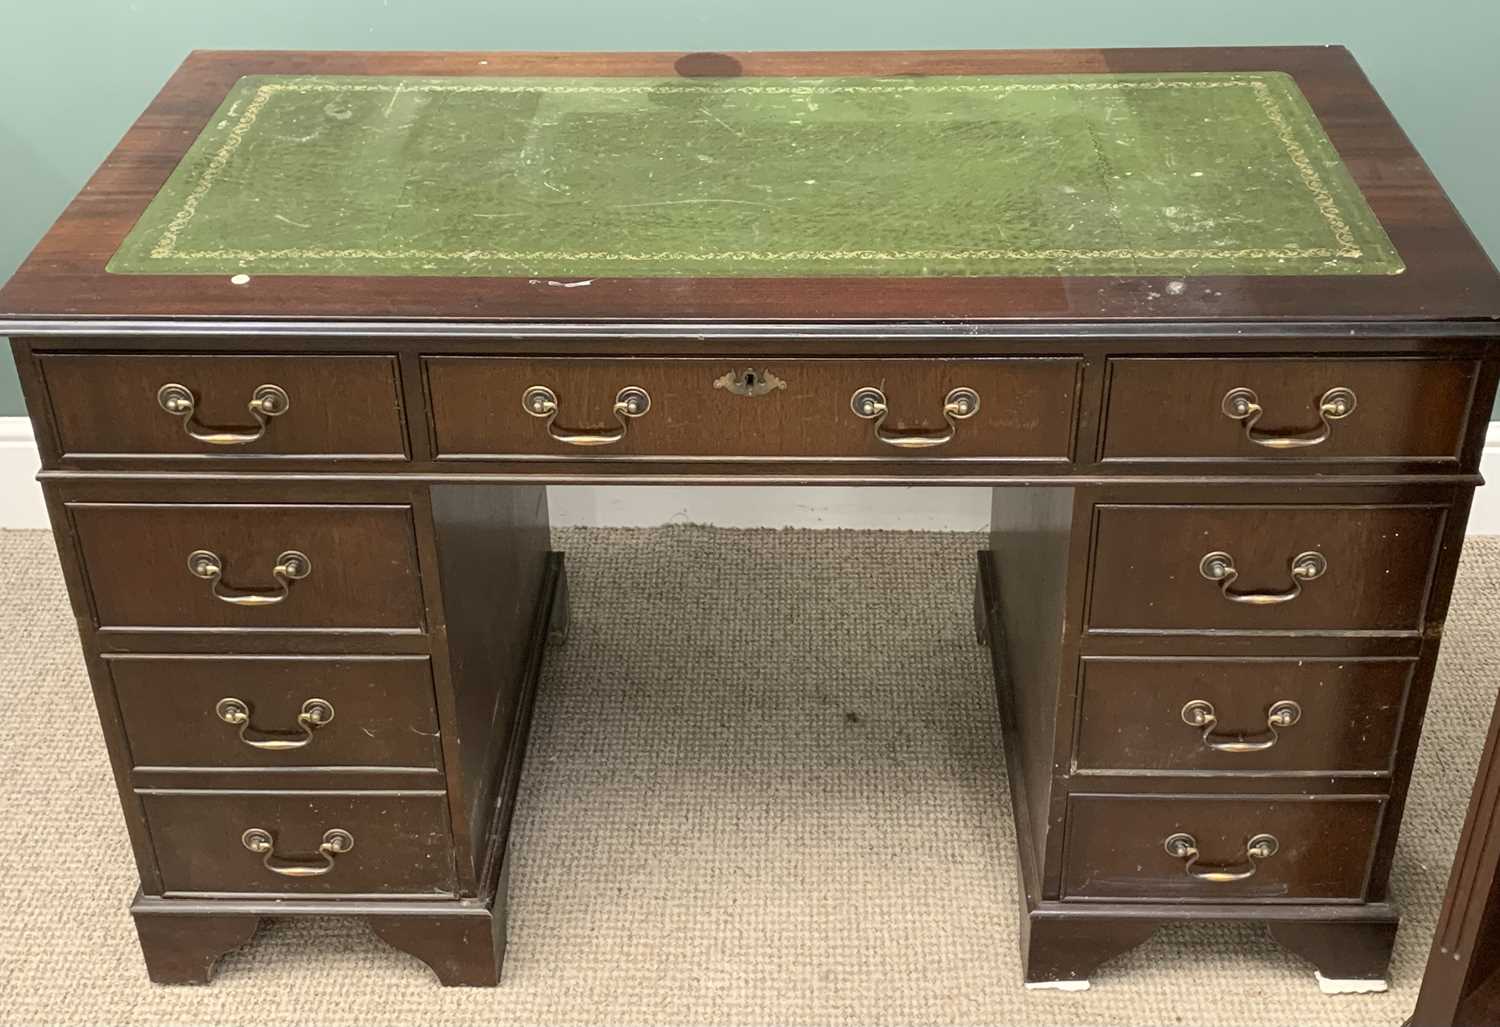 REPRODUCTION DESK with tooled green leather effect top and twin pedestals, 76 (h) x 122 (w) x 61 (d) - Image 2 of 4